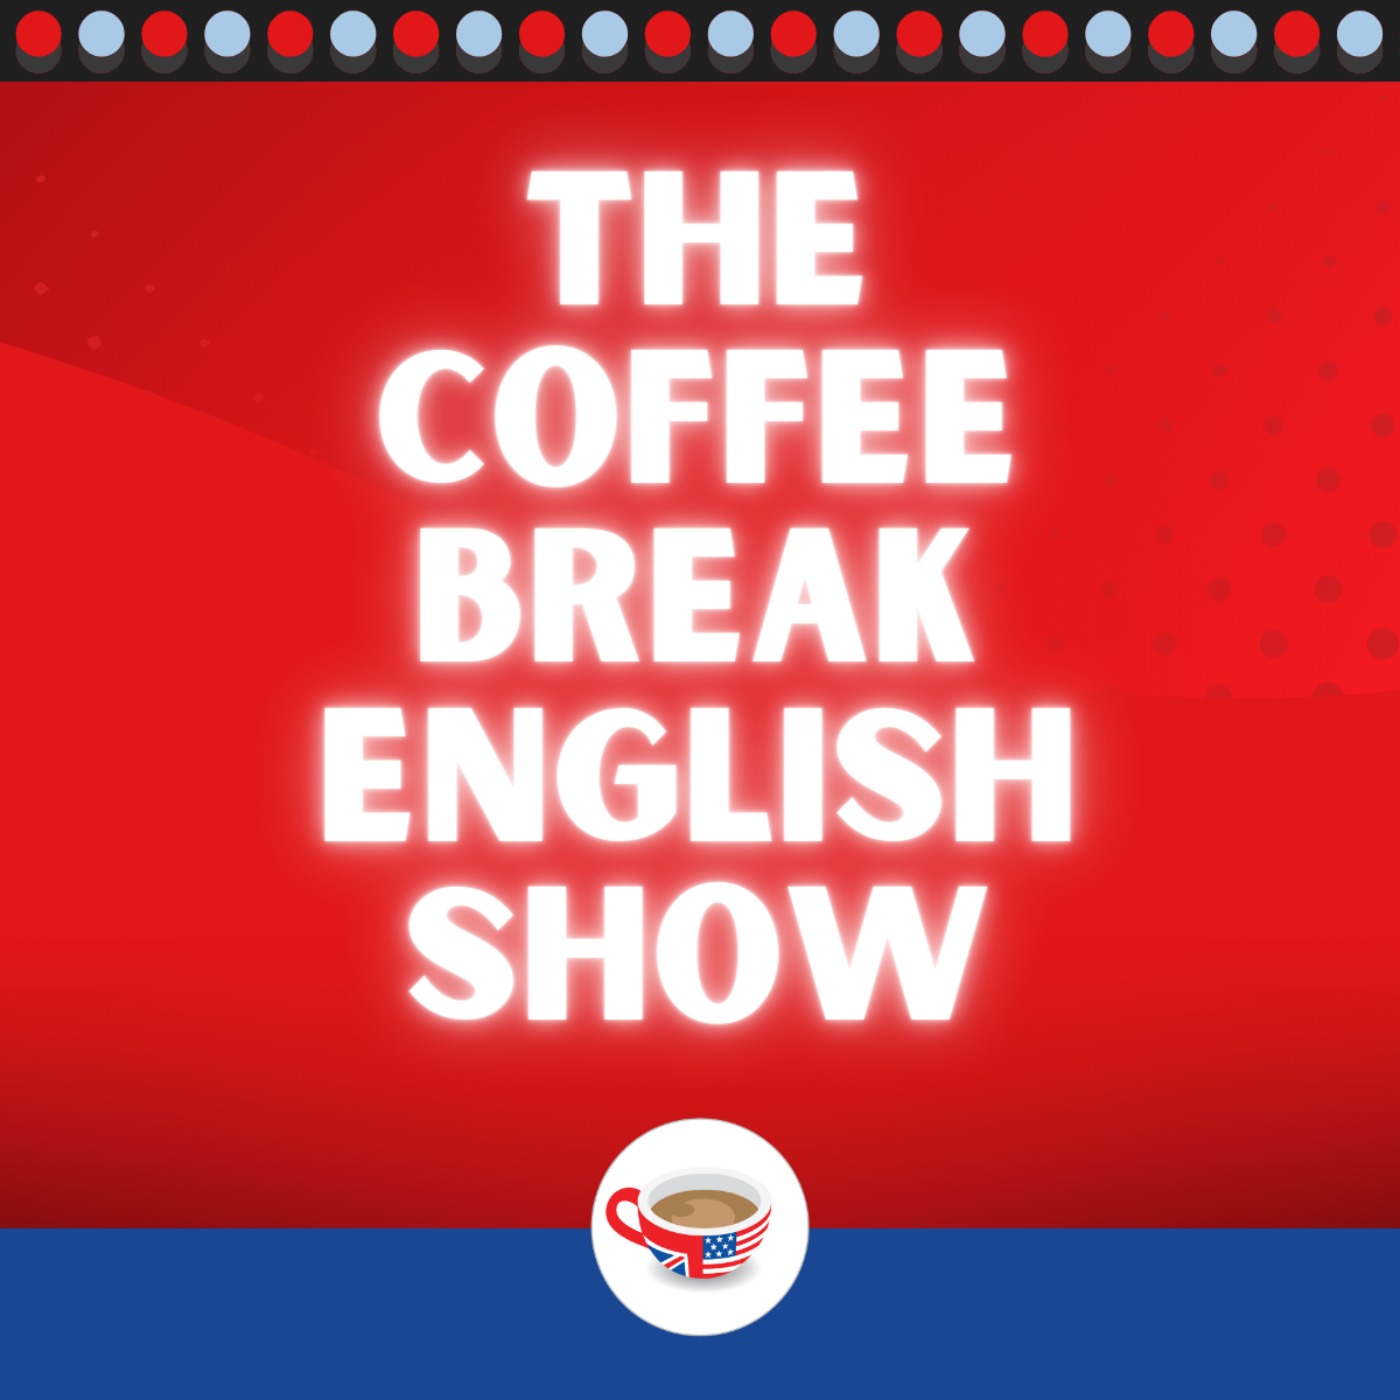 ‘I work' or 'I am working'? - The present simple and present continuous | The Coffee Break English Show 1.02